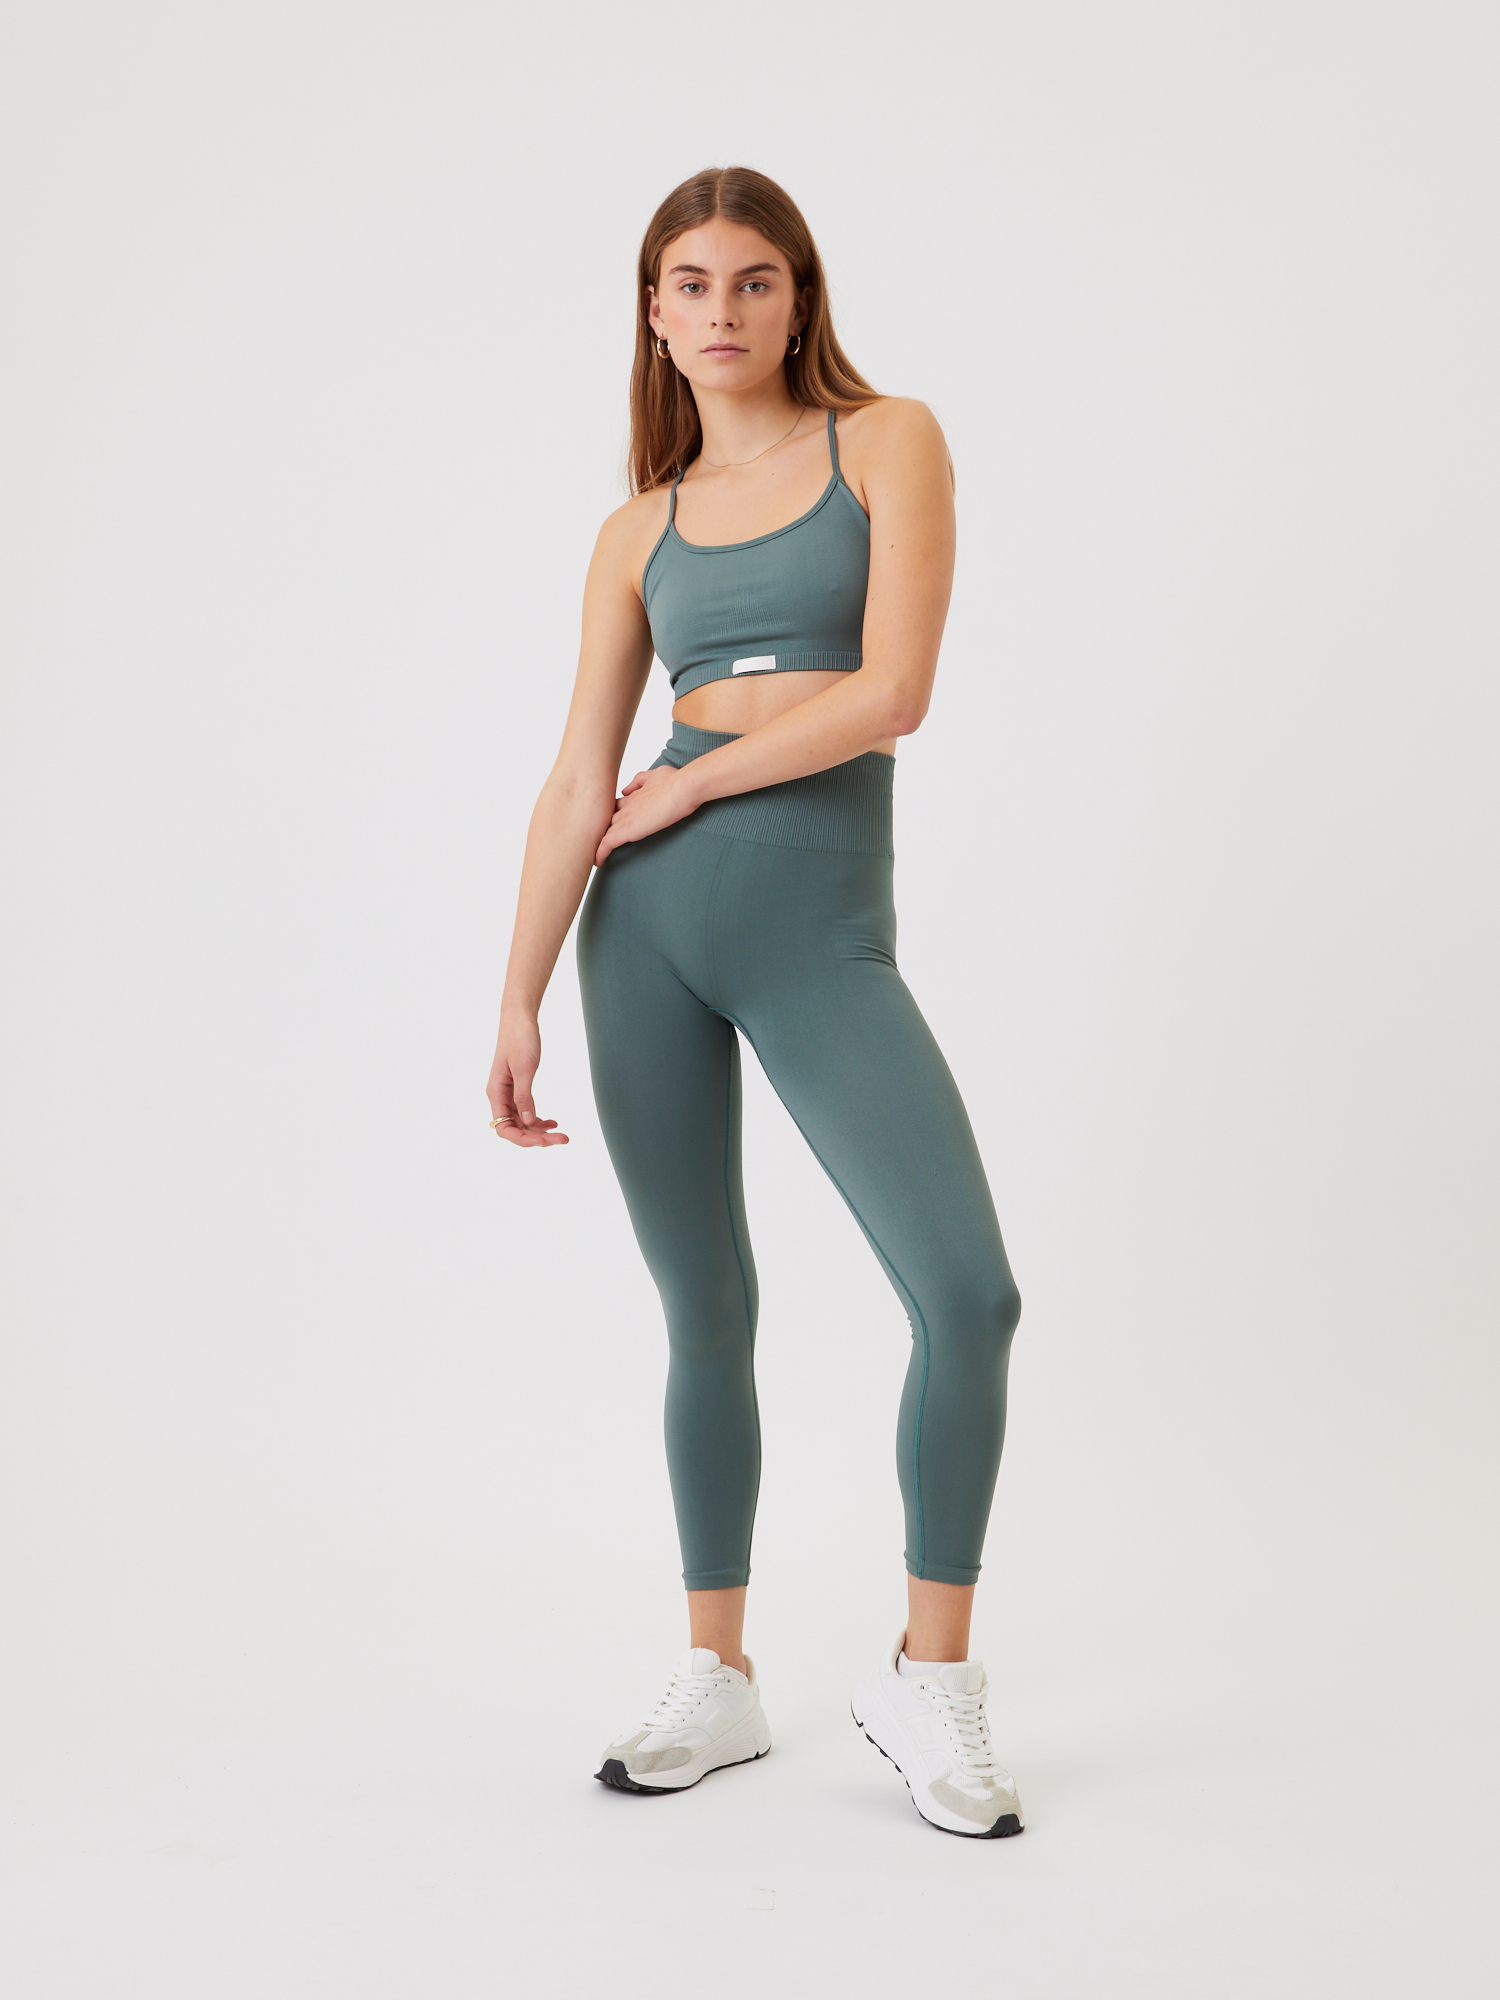 Cotton Yoga Pants – Olive Green and Sky Blue – Yoga Rudra